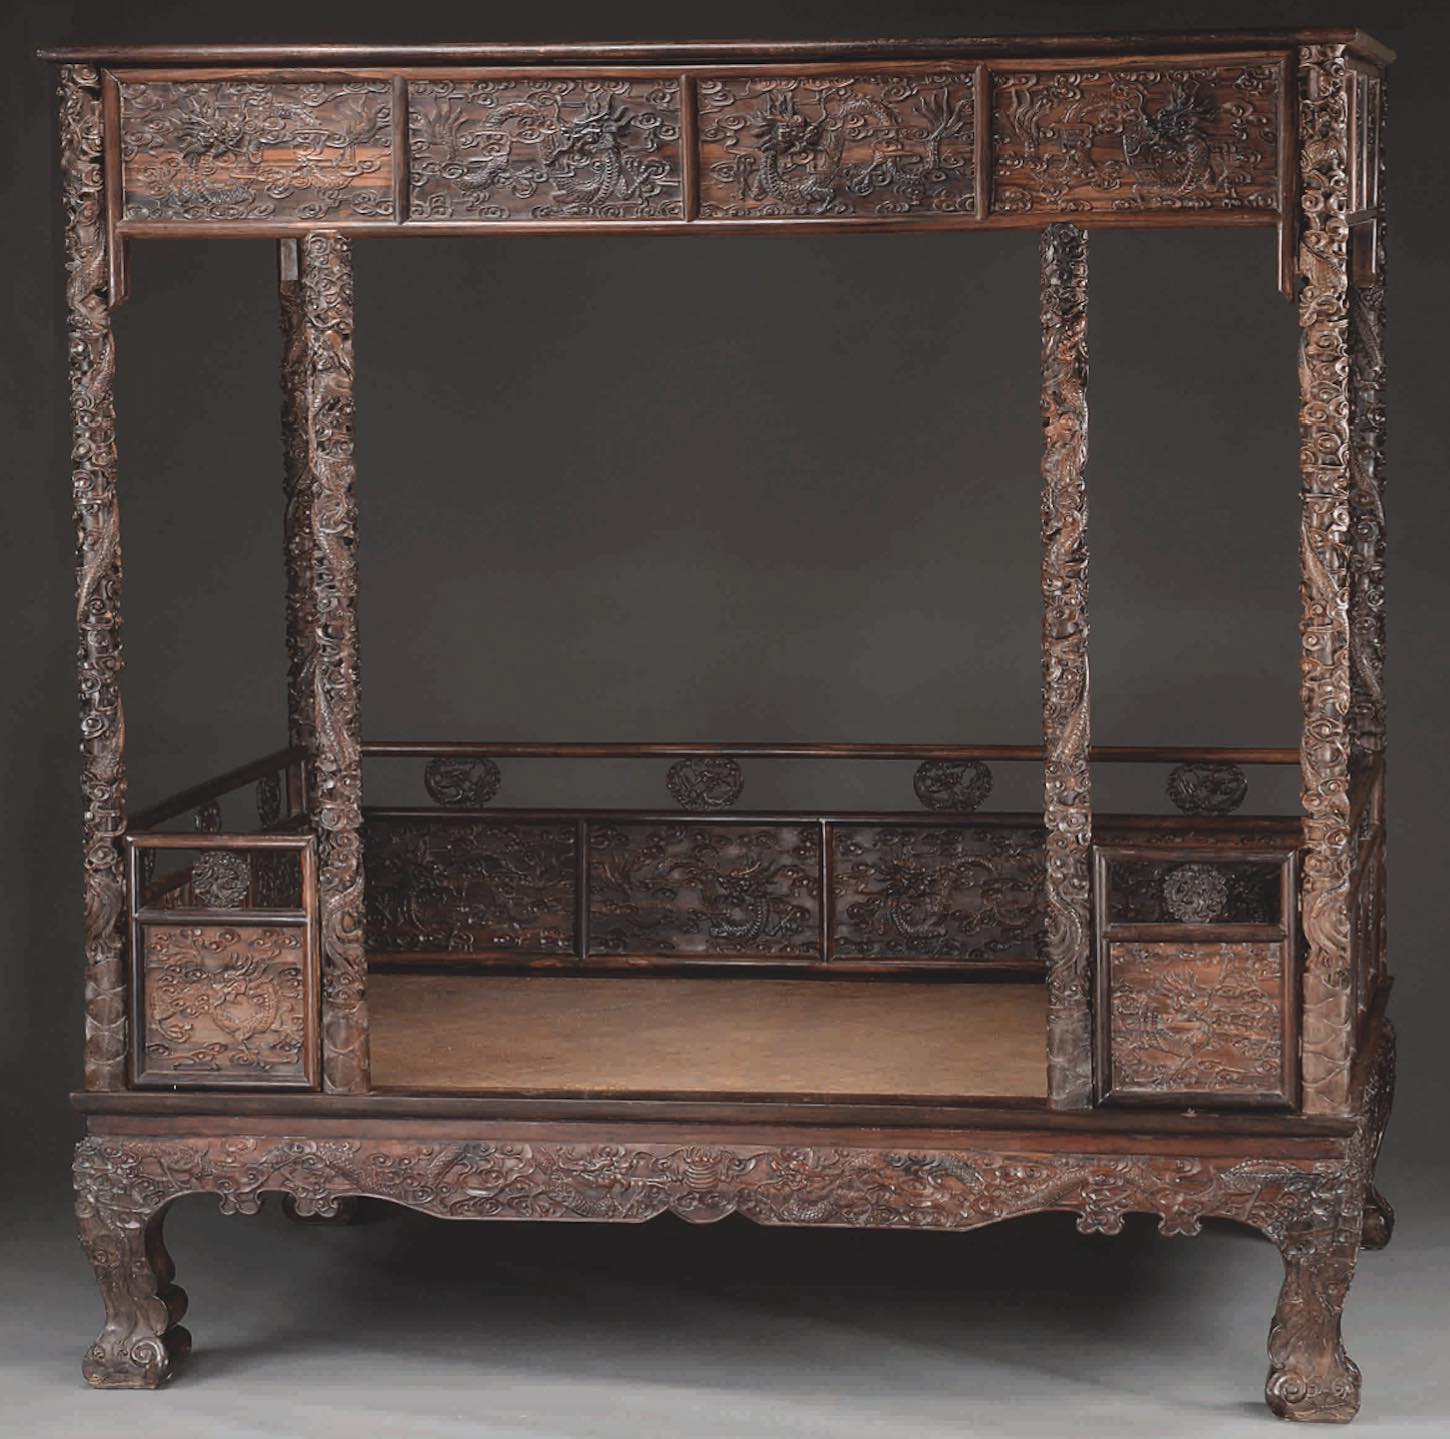 An Outstanding Chinese Zitan Carved Canopy Bed Realized $33,180.